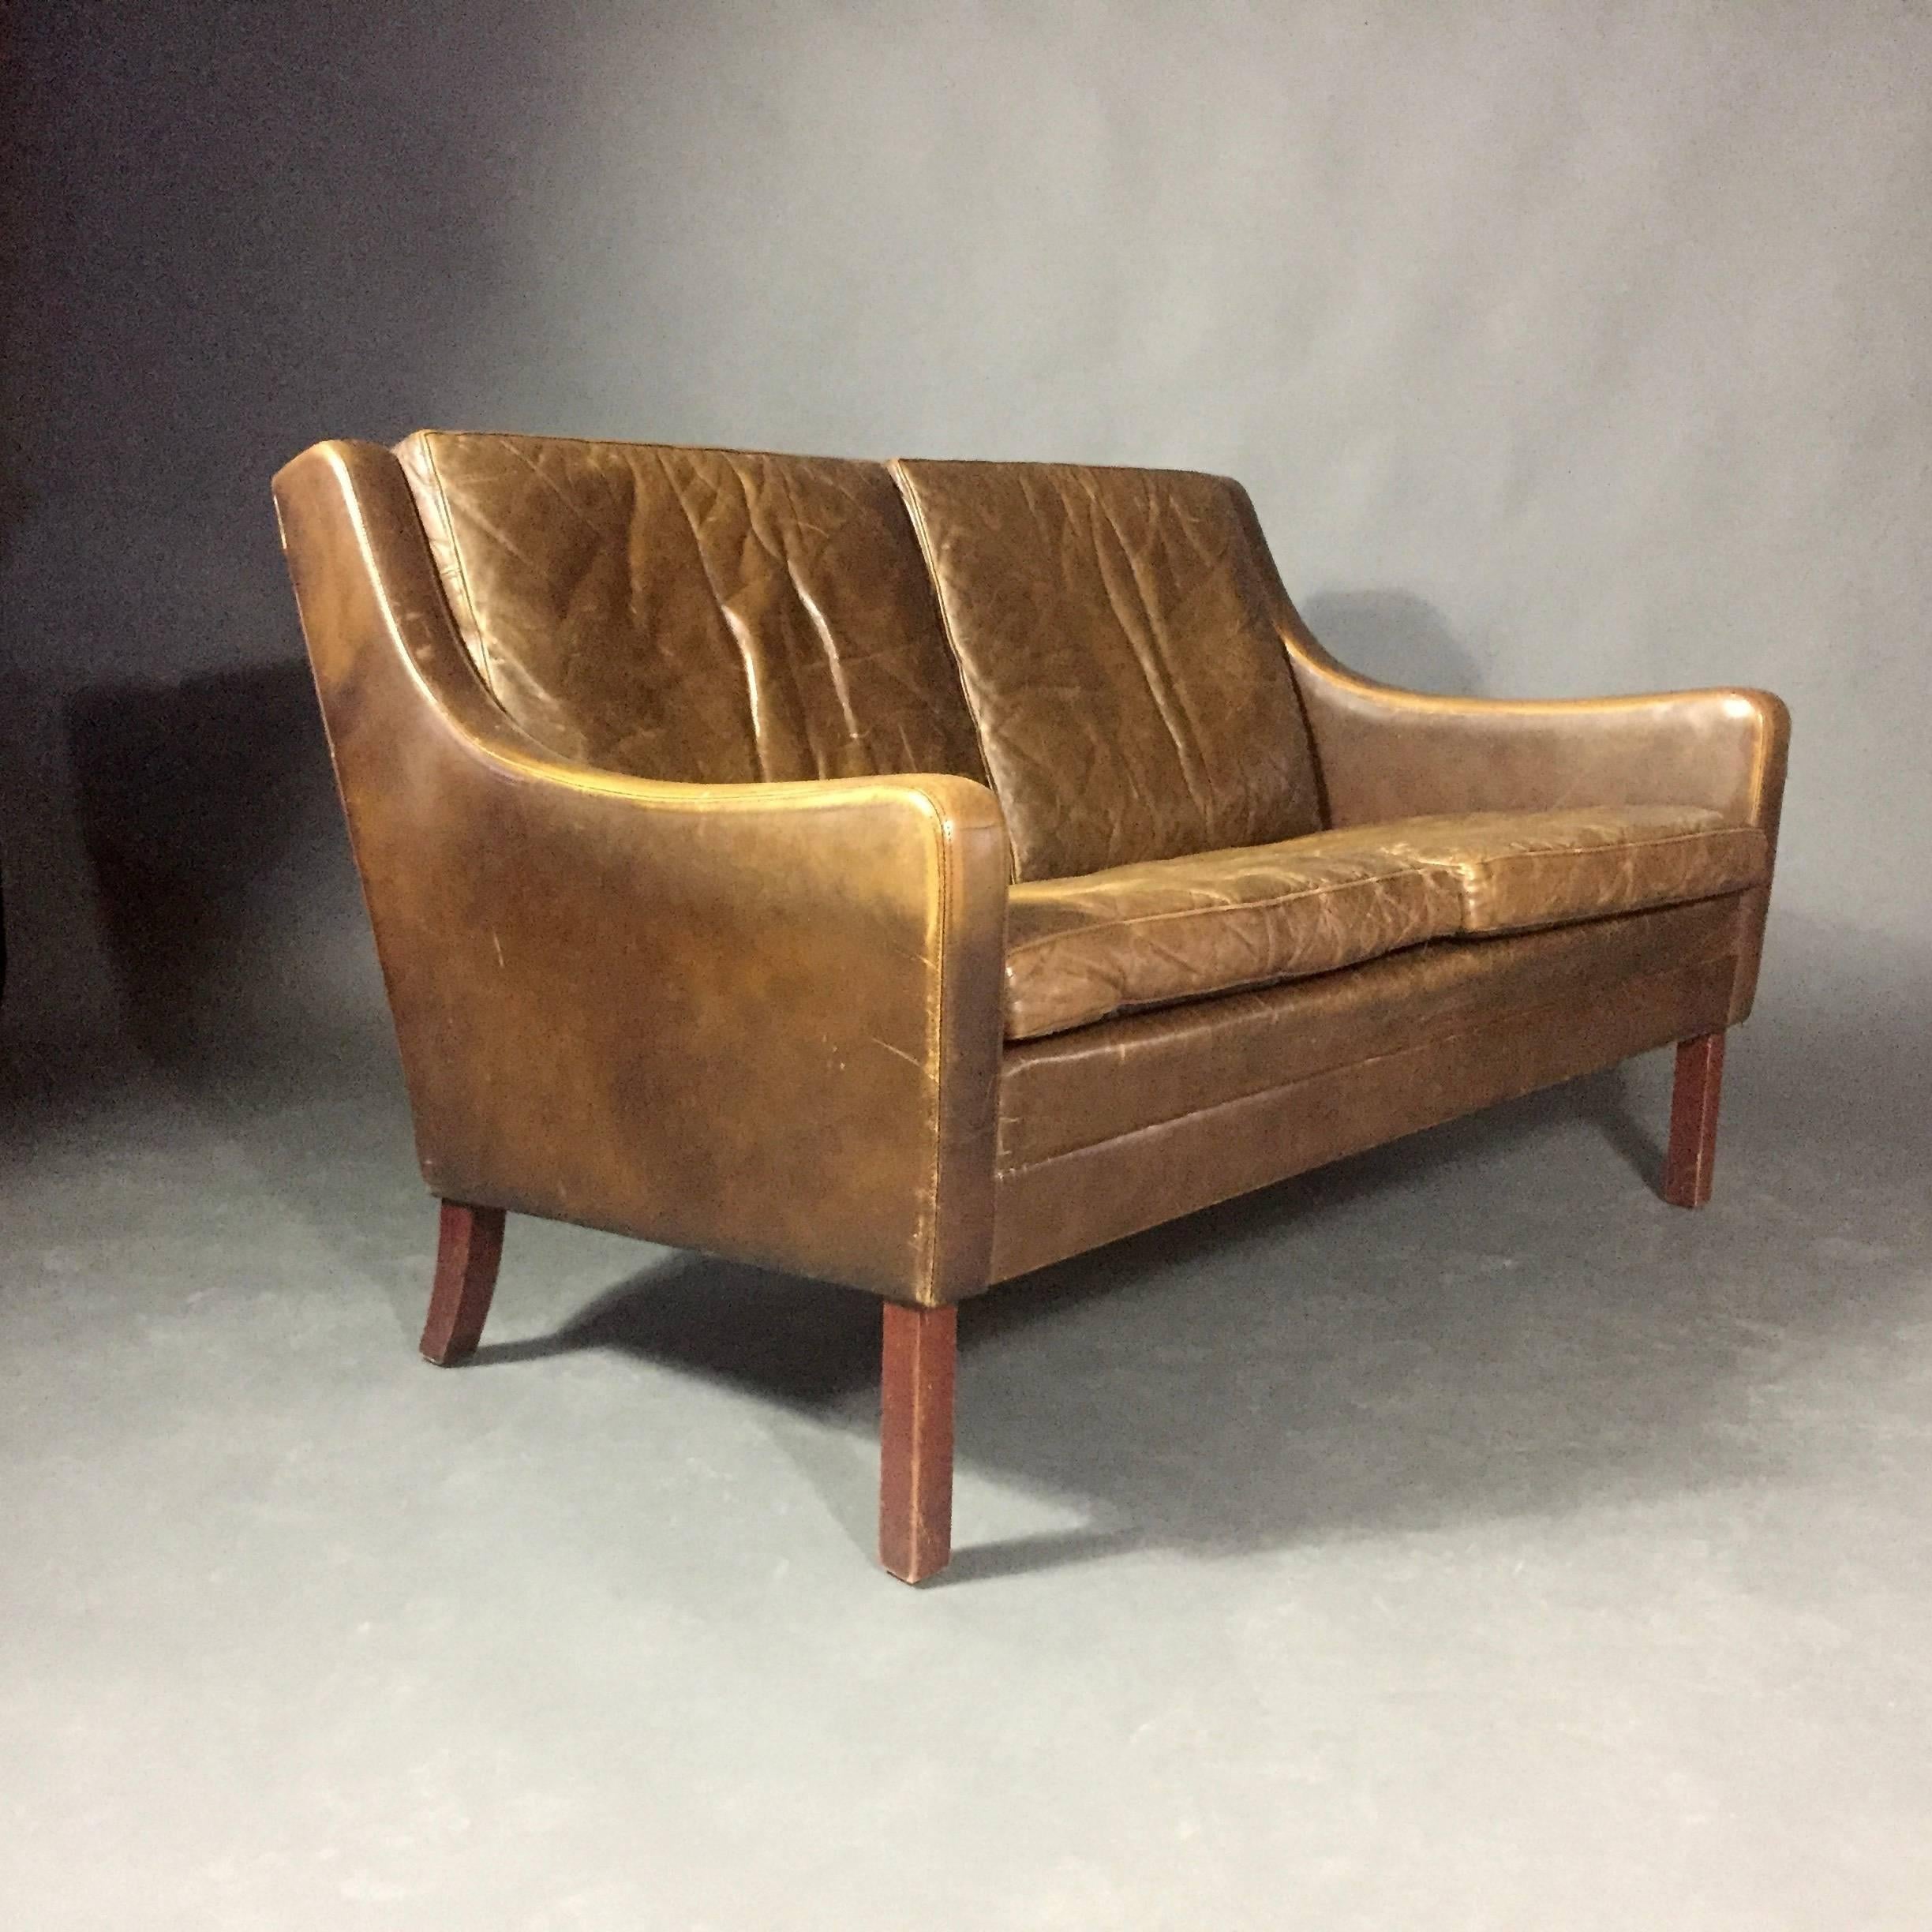 The vintage patina to the cognac leather has to be seen in person to appreciate the perfect wear on this two-seater sofa. If you looking for that gorgeous worn leather look - in otherwise terrific condition. New dust catch to the underside. Danish